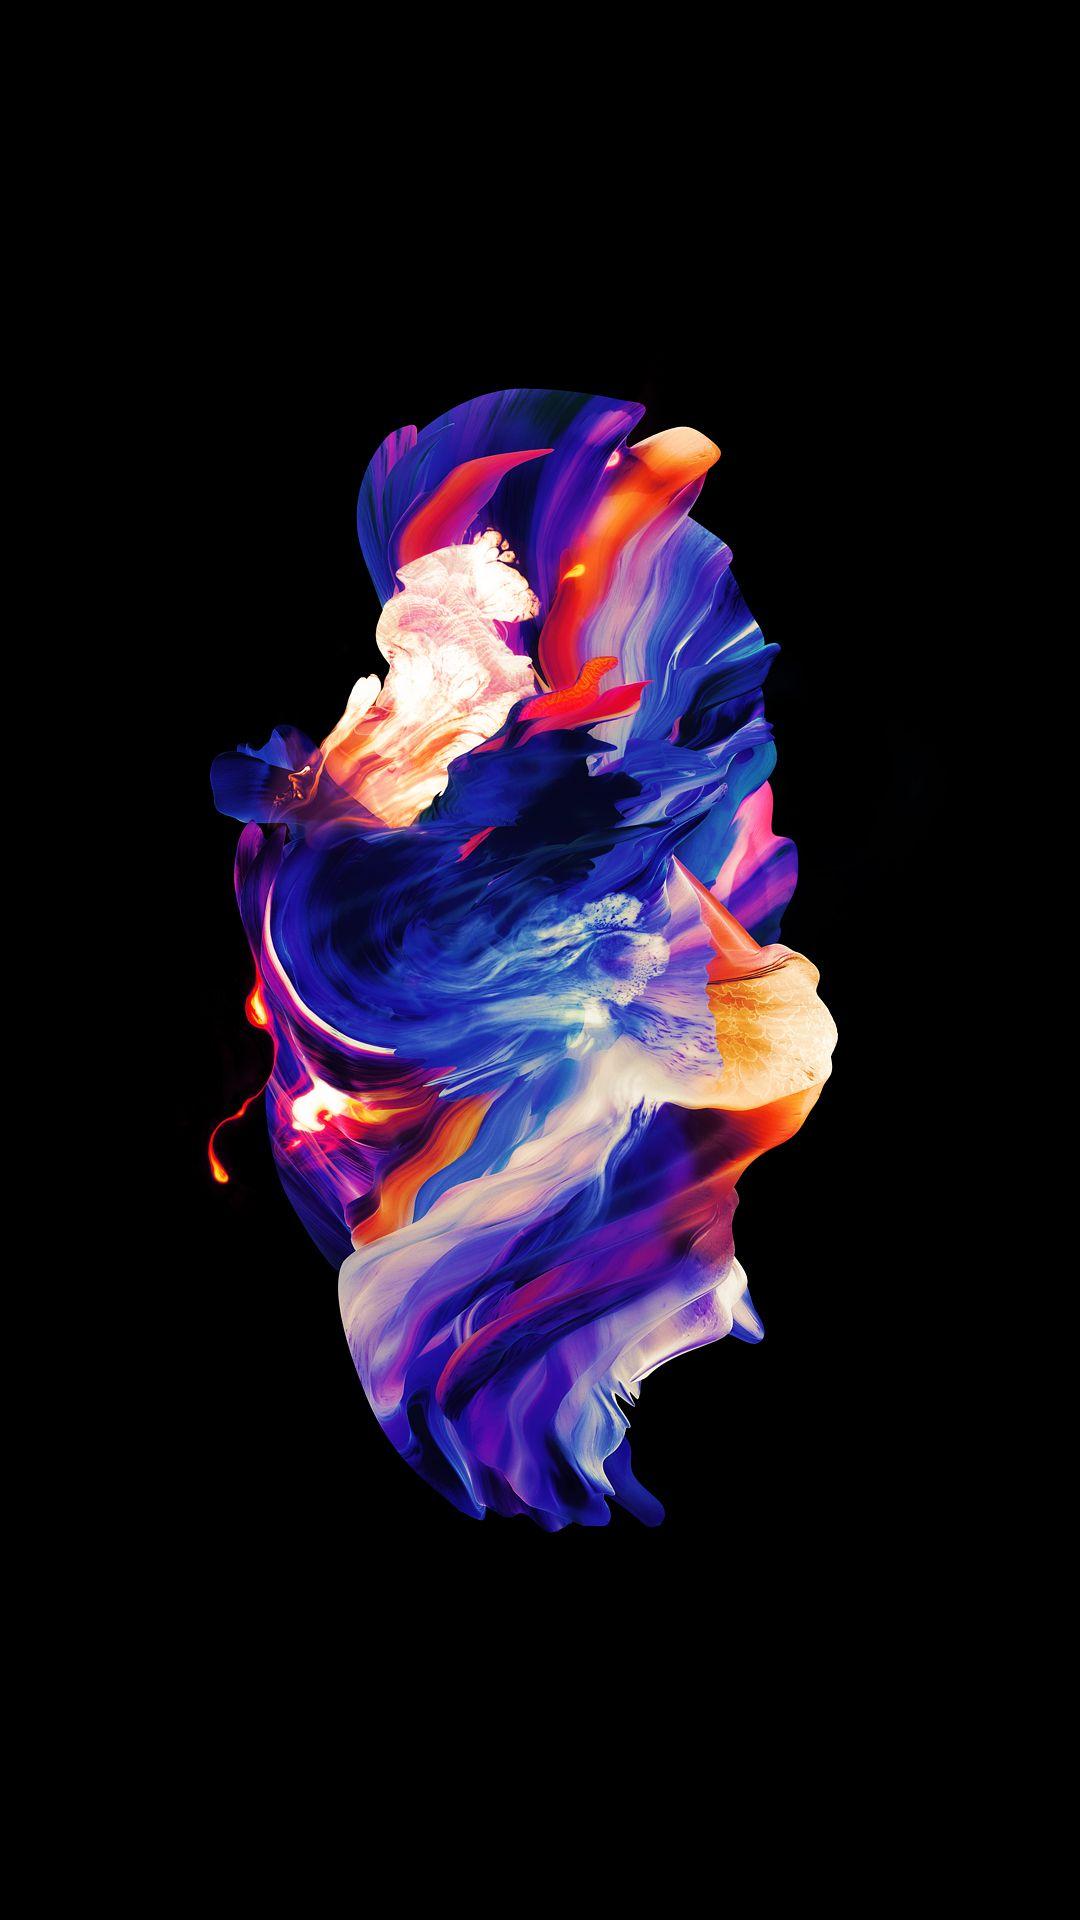 OnePlus 5T Wallpapers - Wallpaper Cave